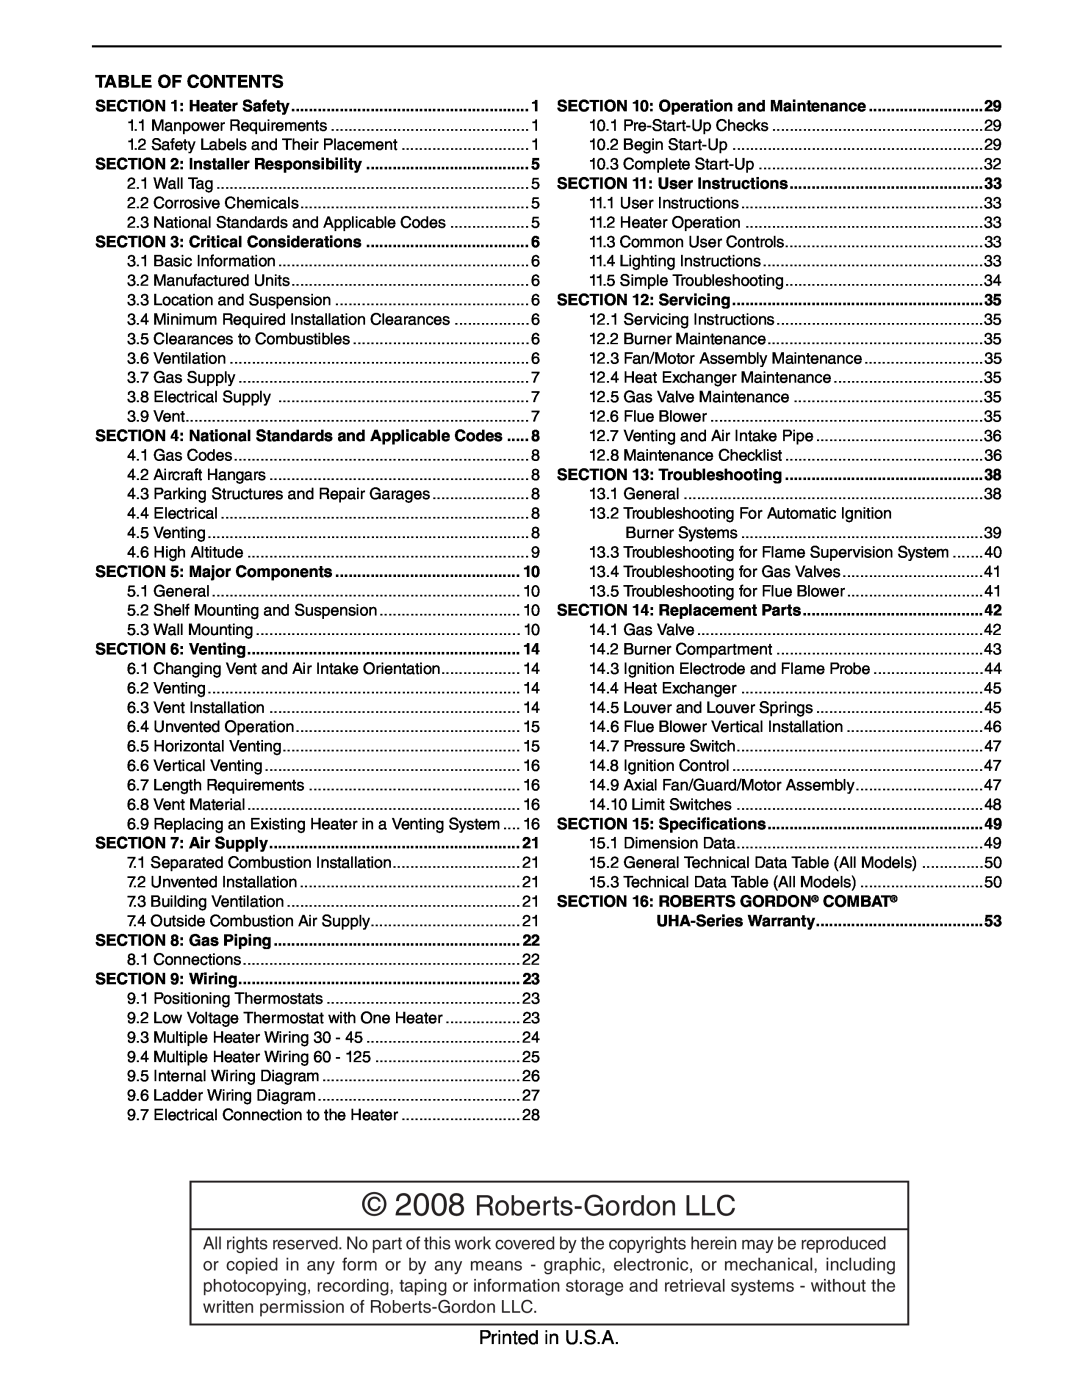 Roberts Gorden UHA[X][S] 100, UHA[X][S] 45, UHA[X][S] 30 Roberts-GordonLLC, Printed in U.S.A, Table Of Contents 